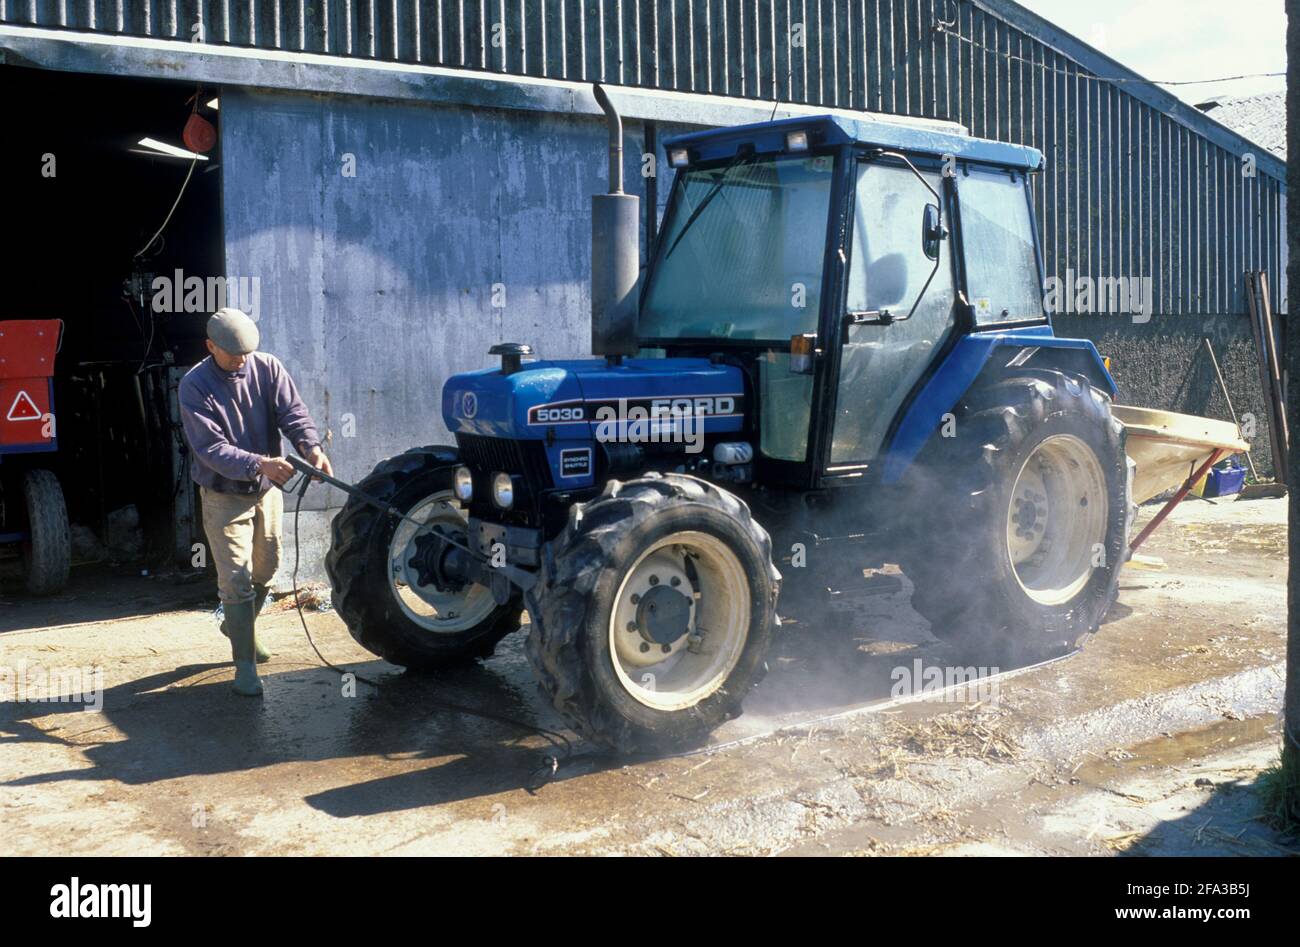 A Devon farmer washing his Ford 5030 tractor with a power-jet washer, on a hard concrete standing. Stock Photo